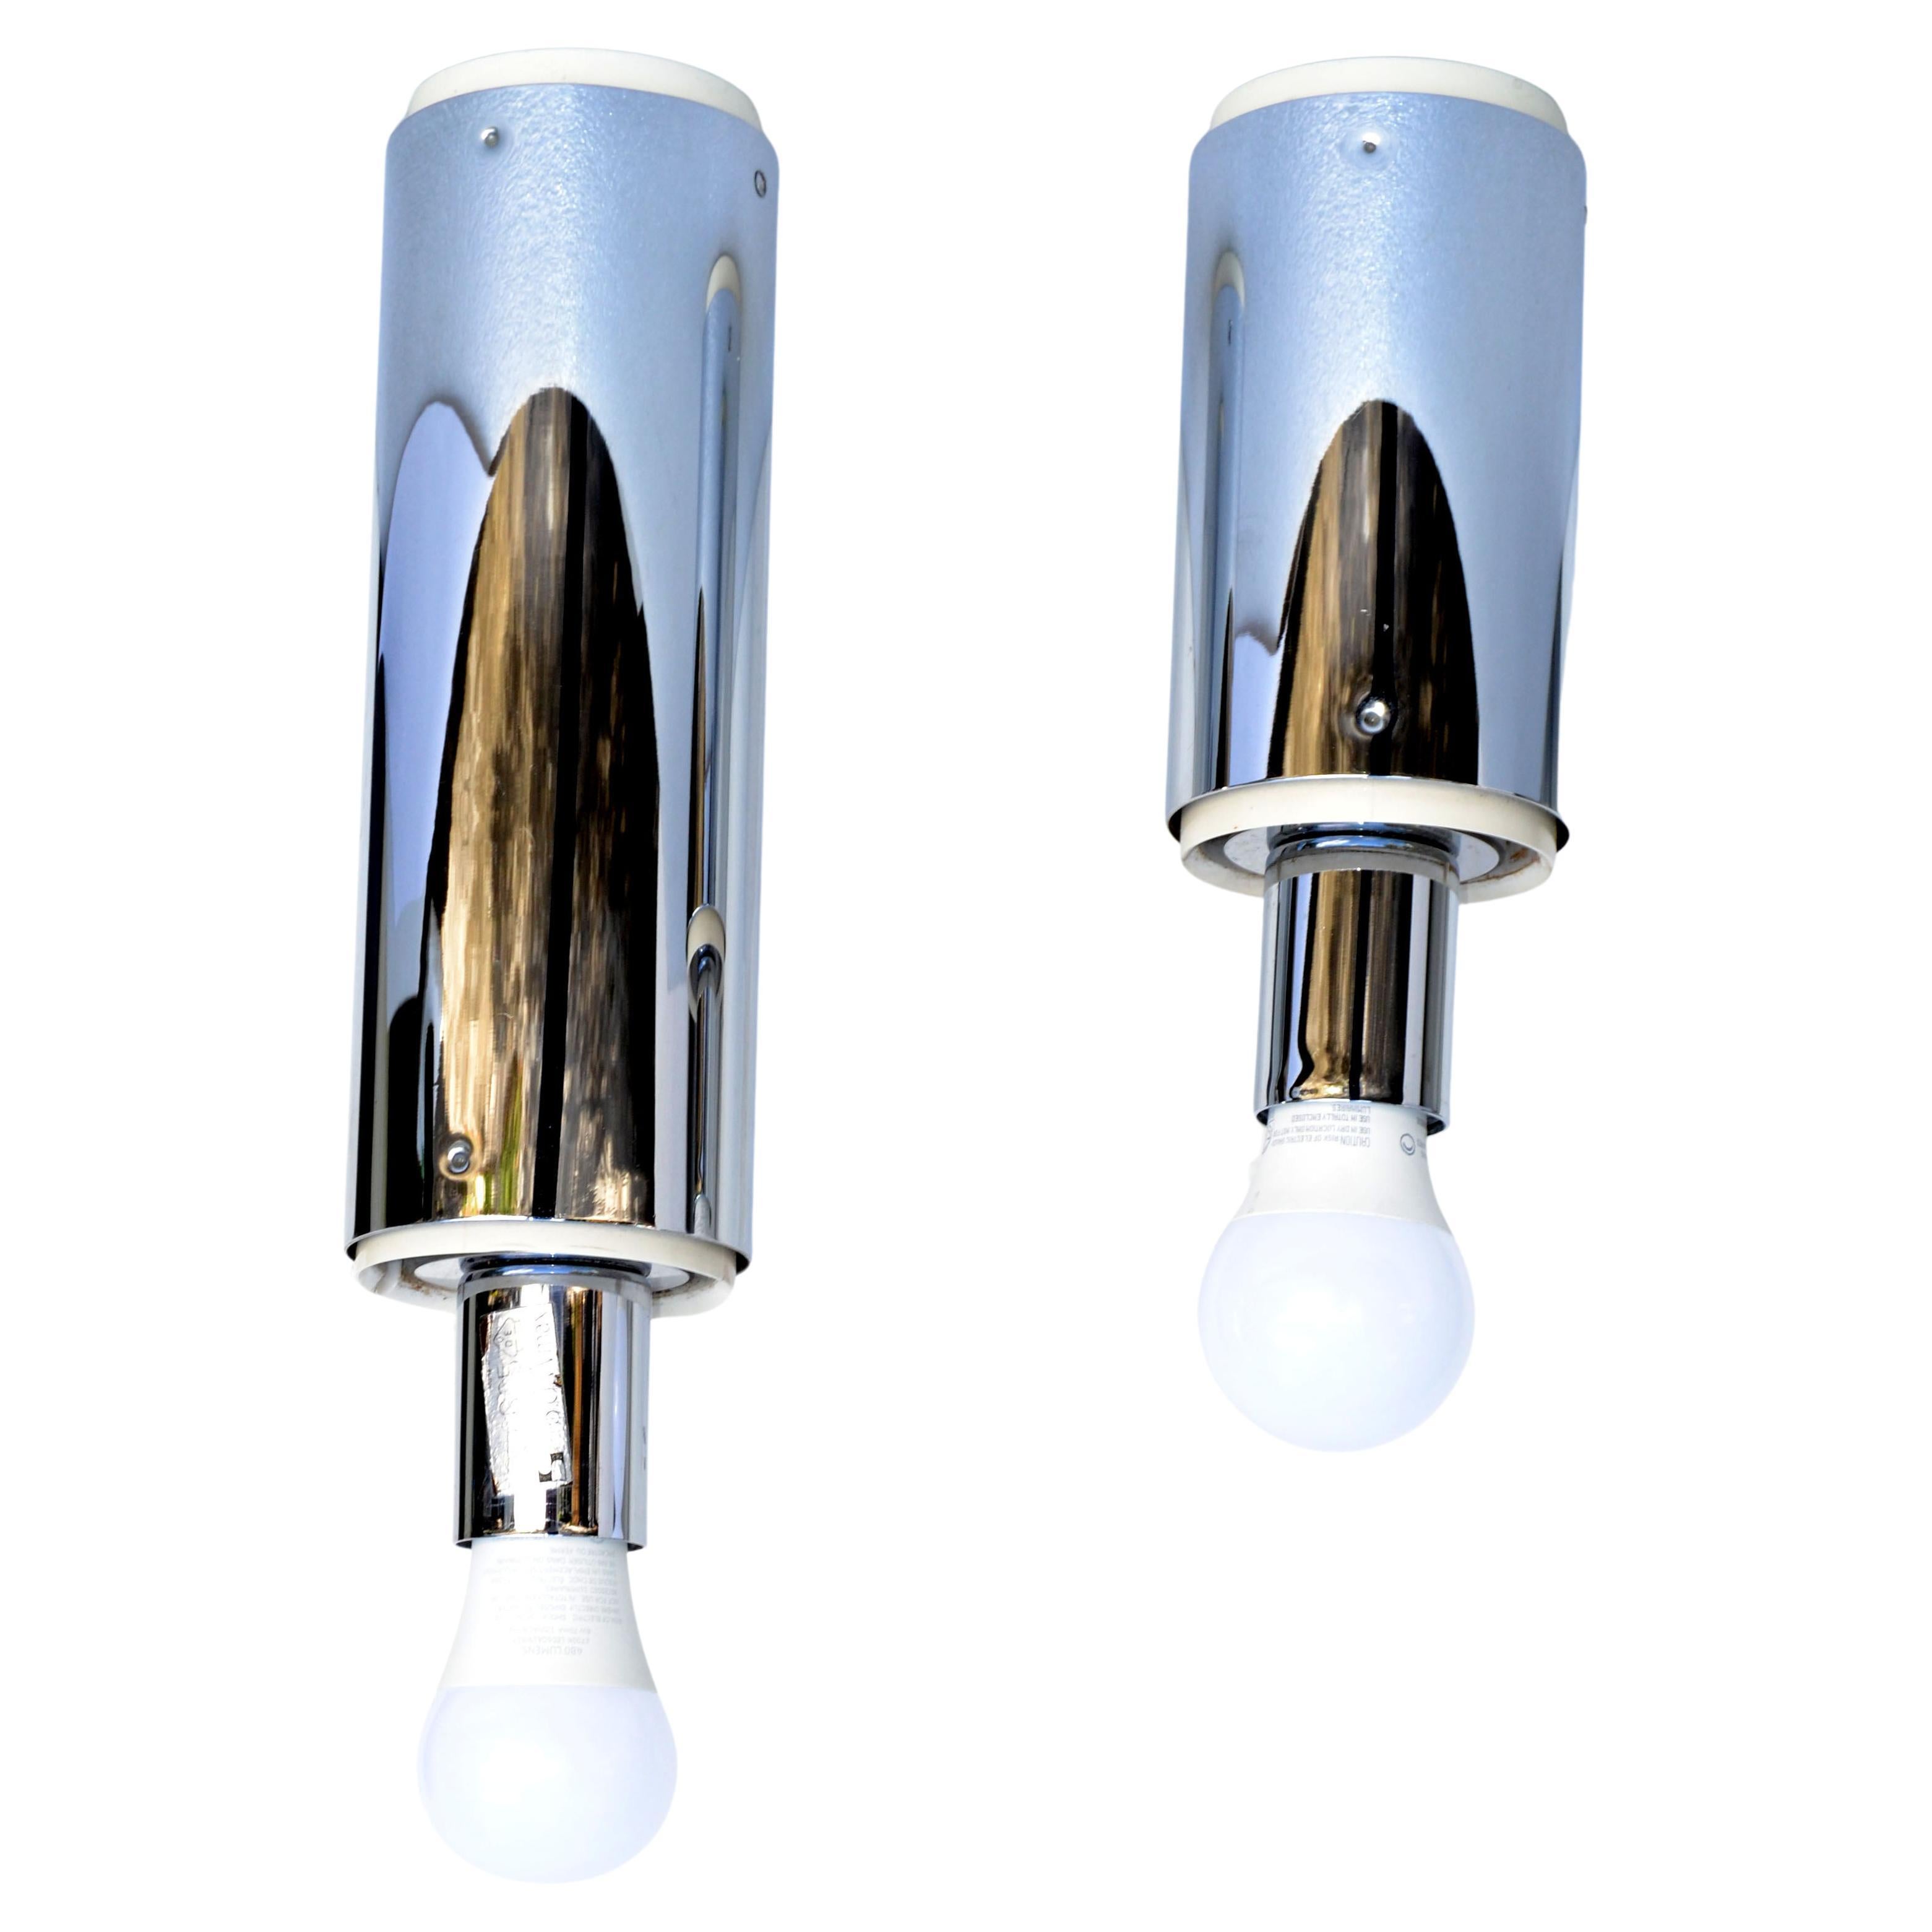 Set of 2 chrome lights, ceiling lamps, wall sconces designed by Japanese Designer Motoko Ishii in 1970 and manufactured by Staff Leuchten made in West Germany.
Each tubular Light takes a regular or LED bulb.
UL listed and both are marked at the